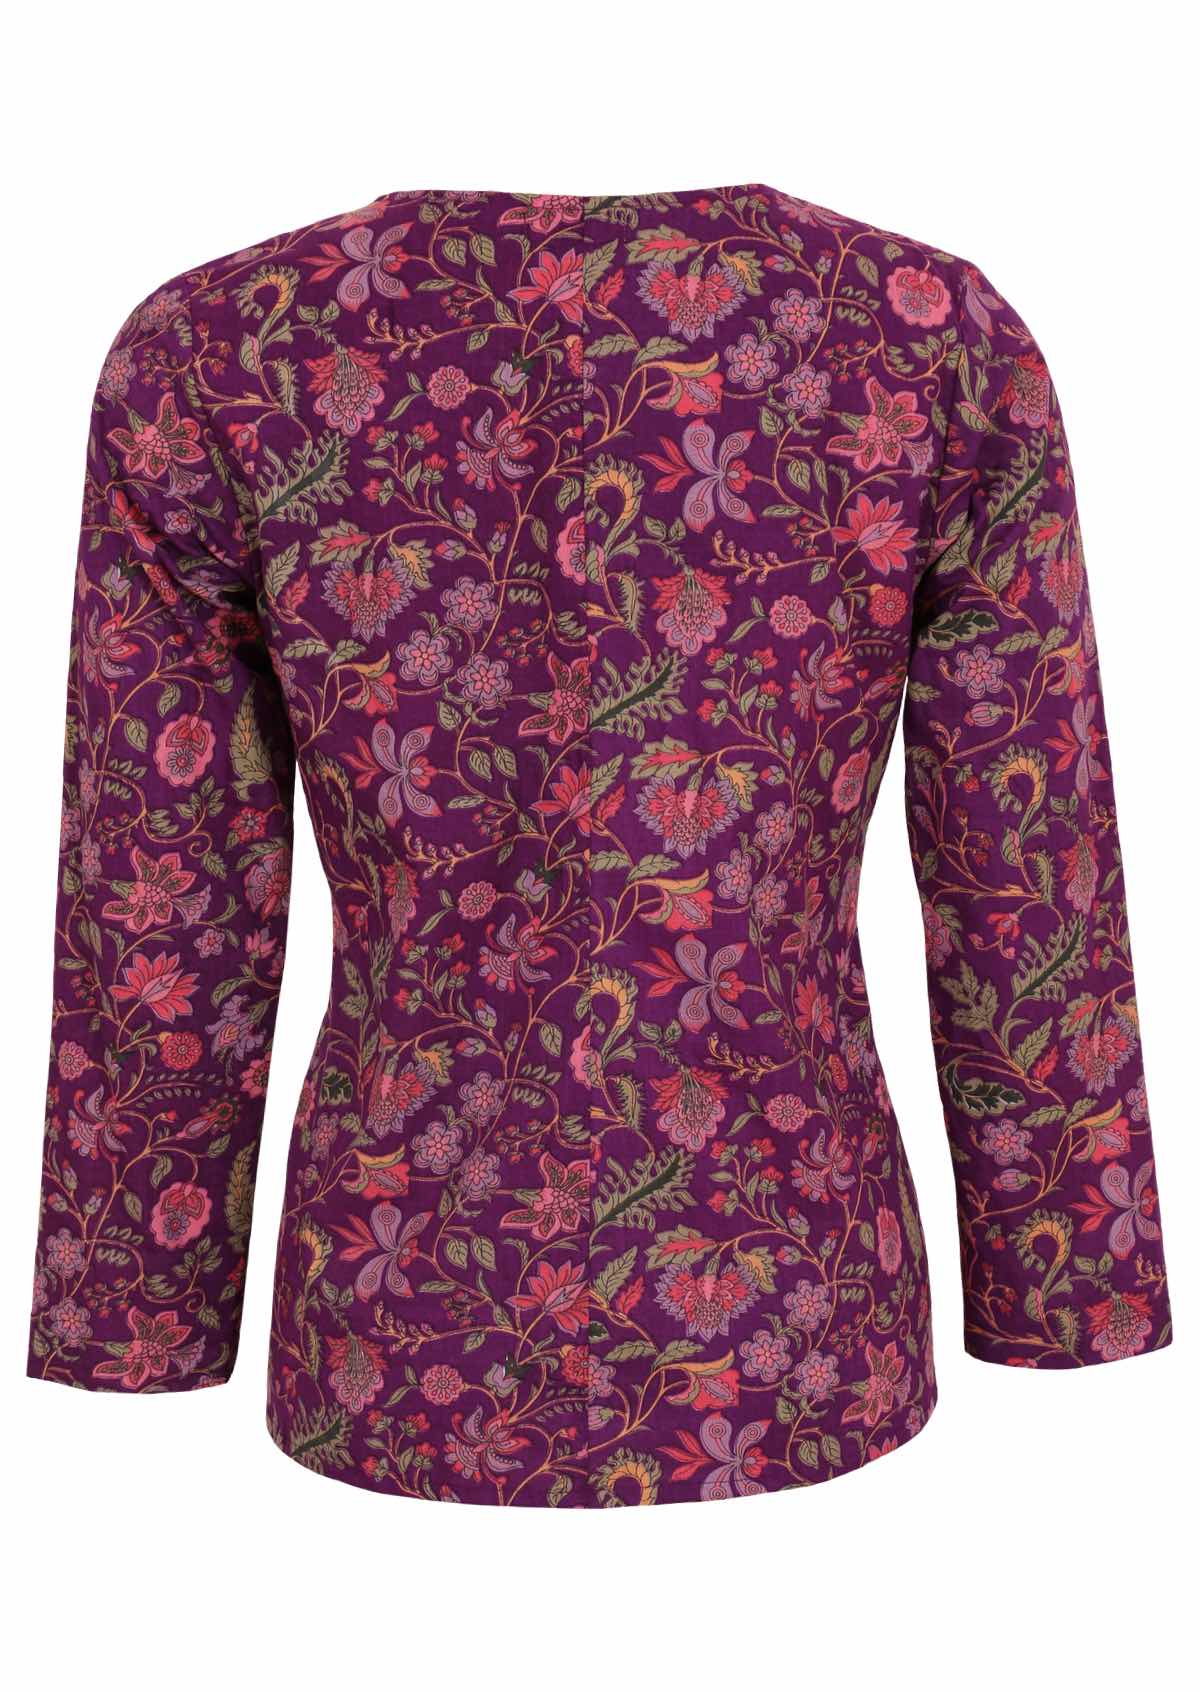 Pink, purple, green and yellow floral print on purple base cotton top